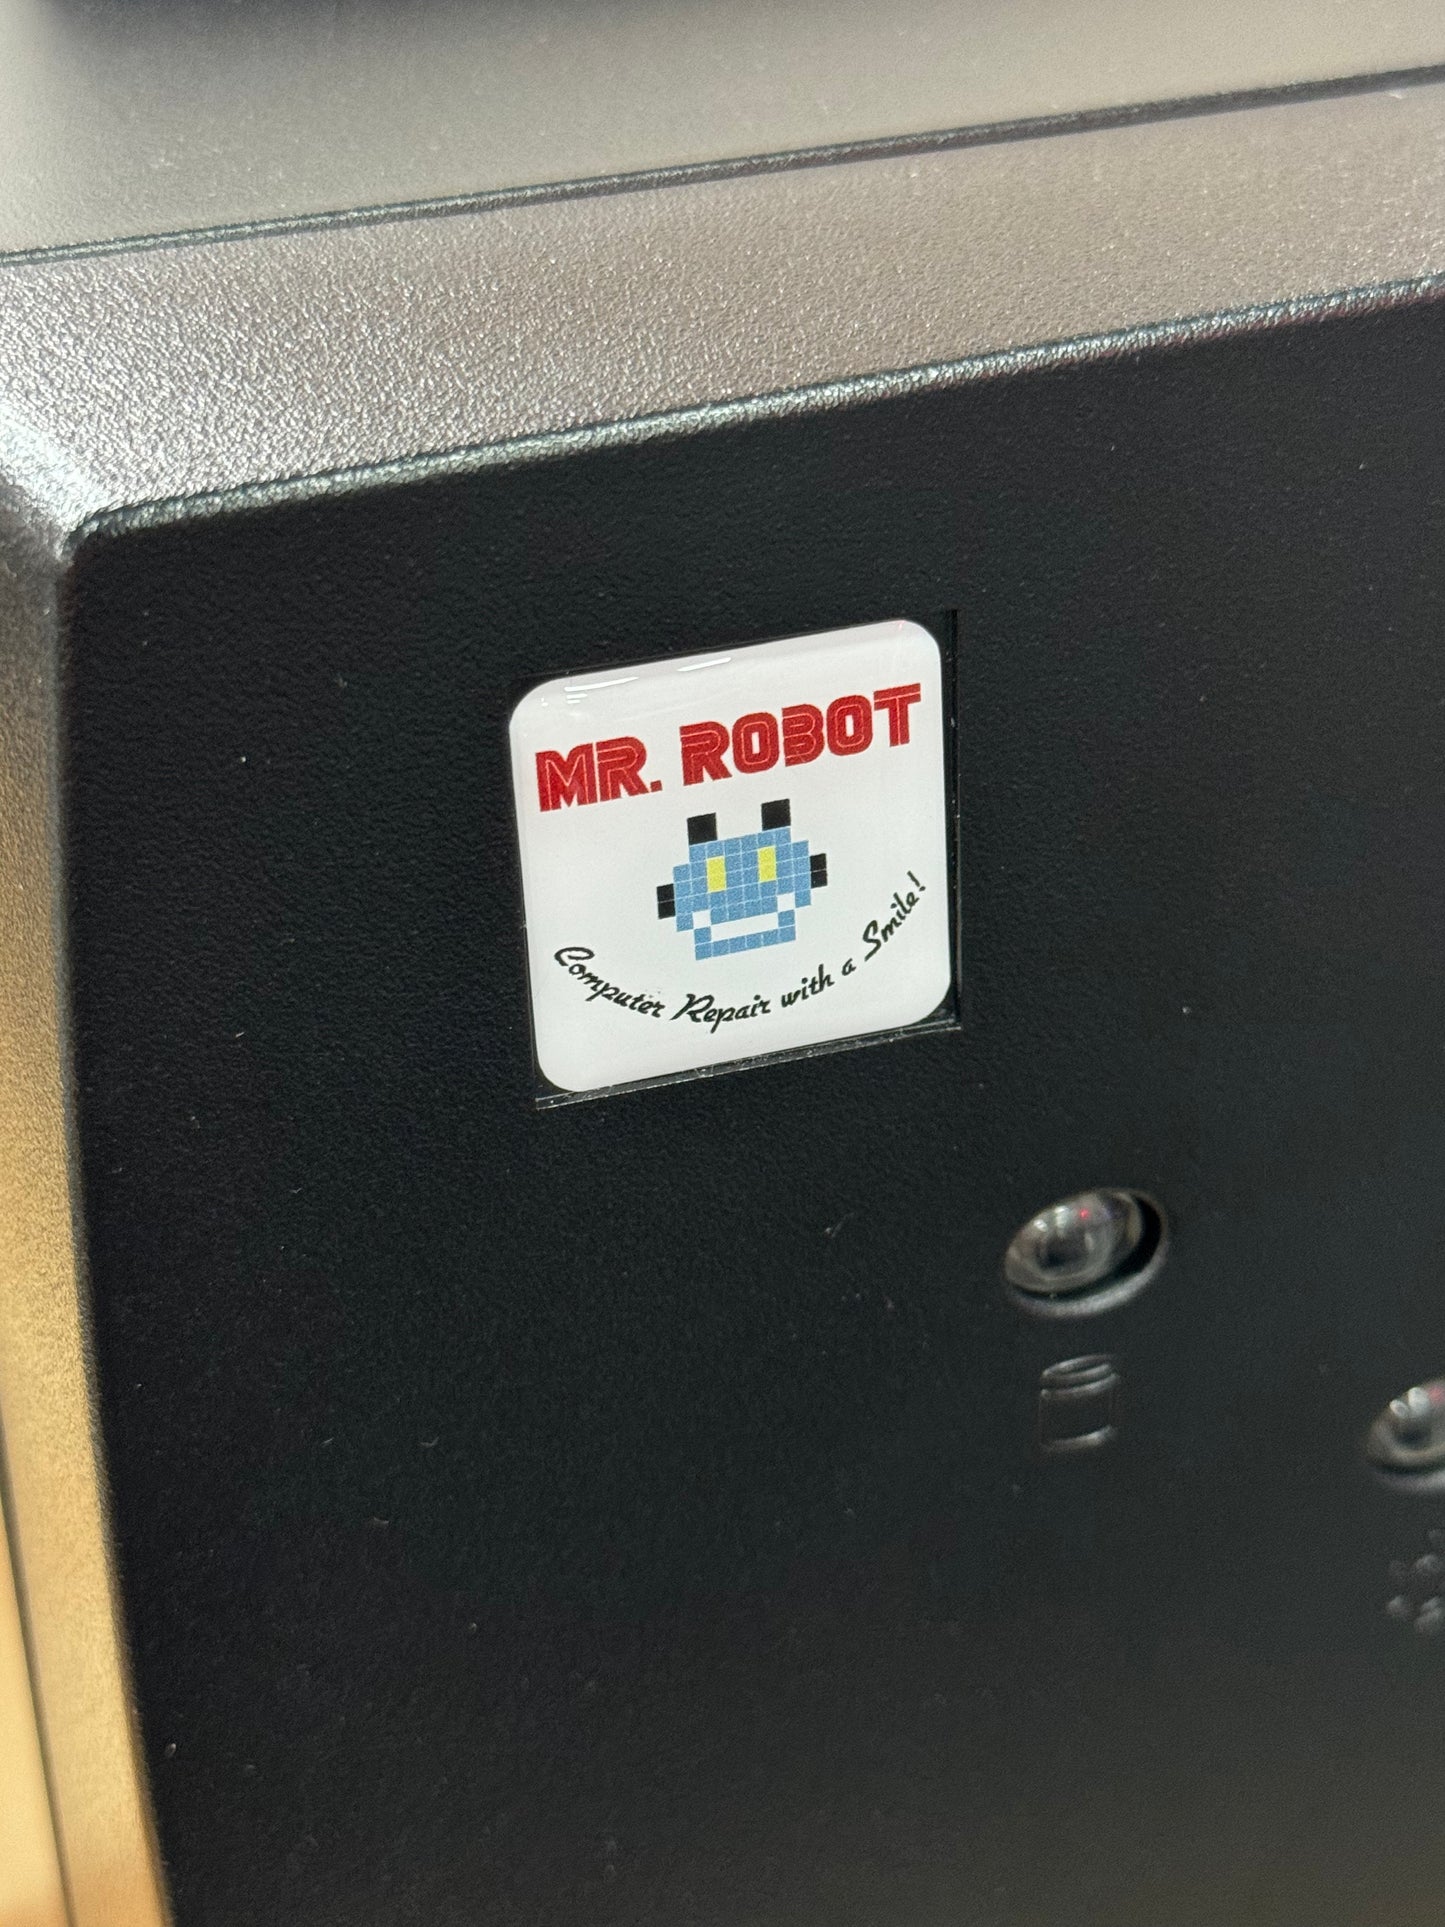 > Mr. Robot < TV Show Cybersecurity Hacker Case Badge Sticker - Dome